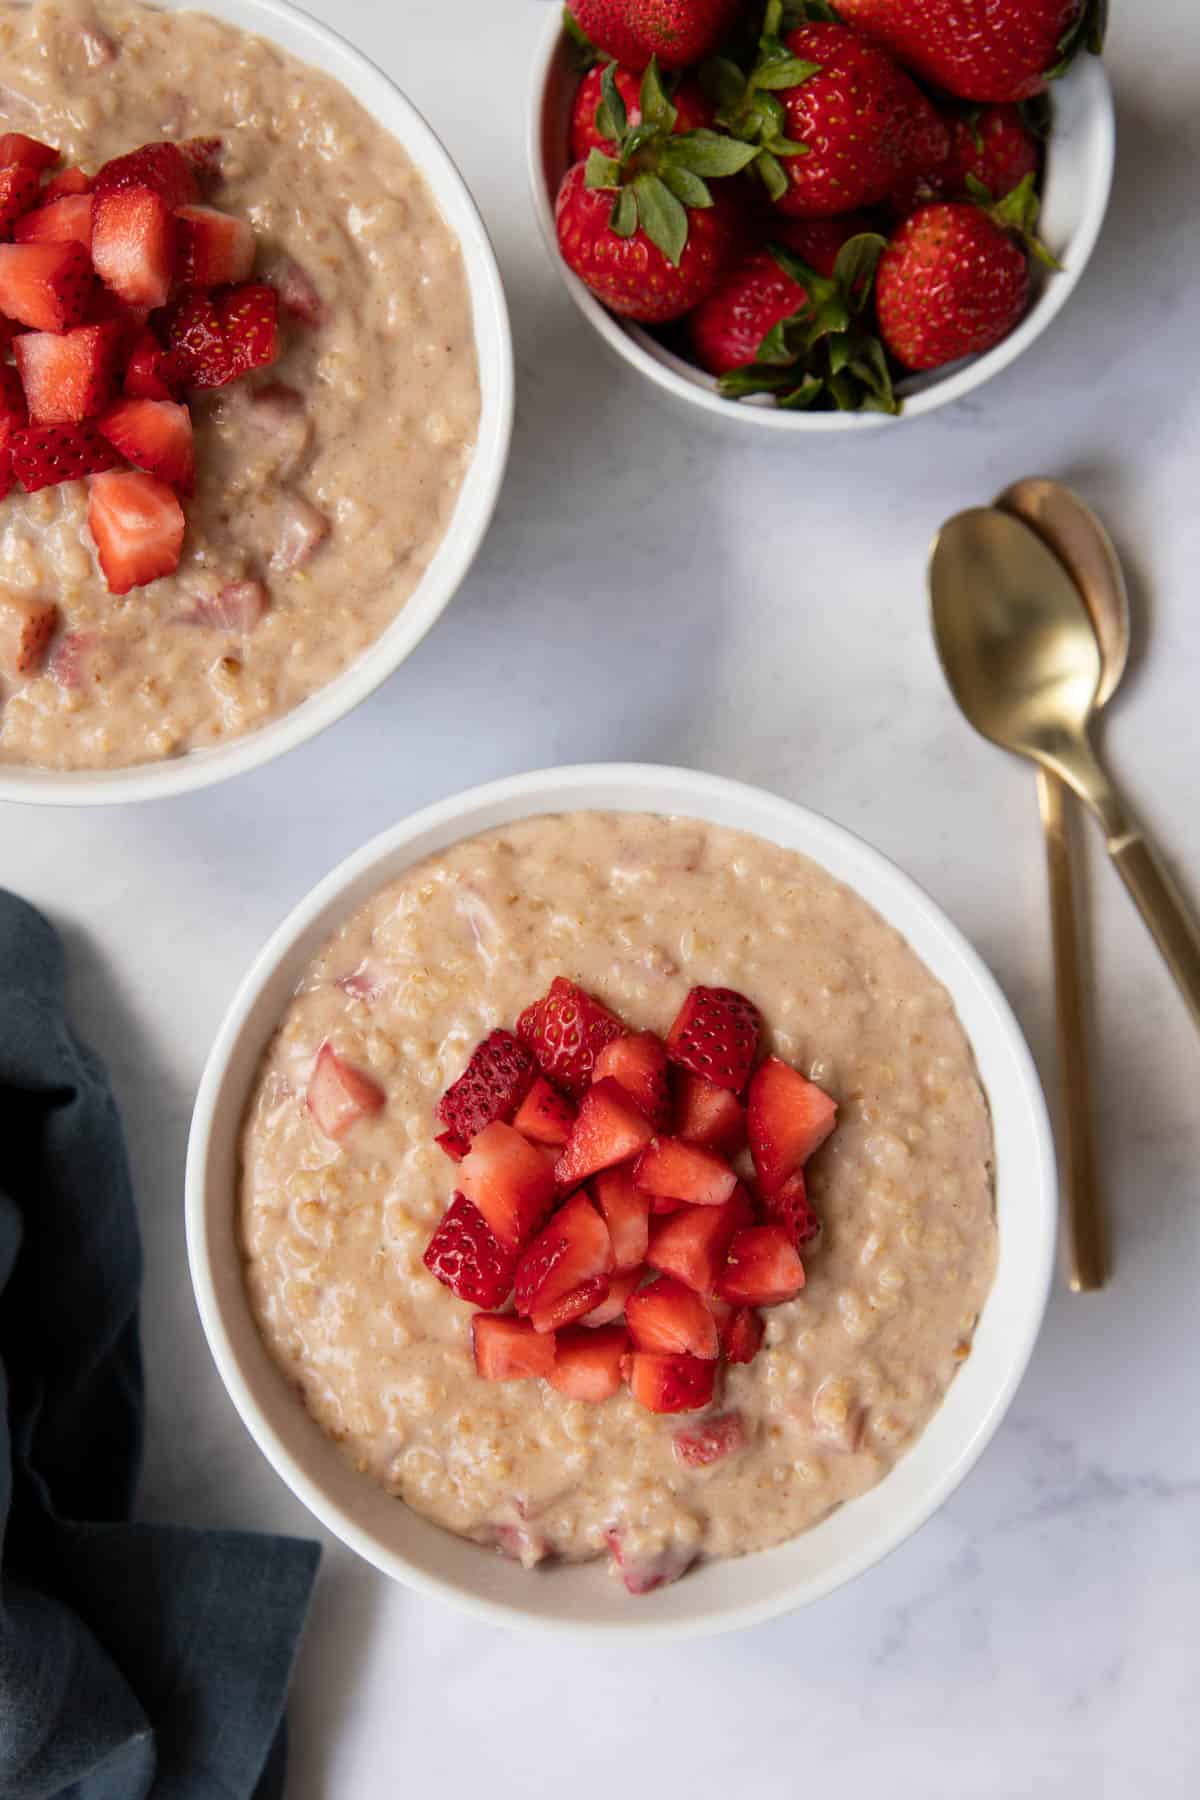 Two bowls of strawberry oatmeal on a tabletop with spoons on the side.